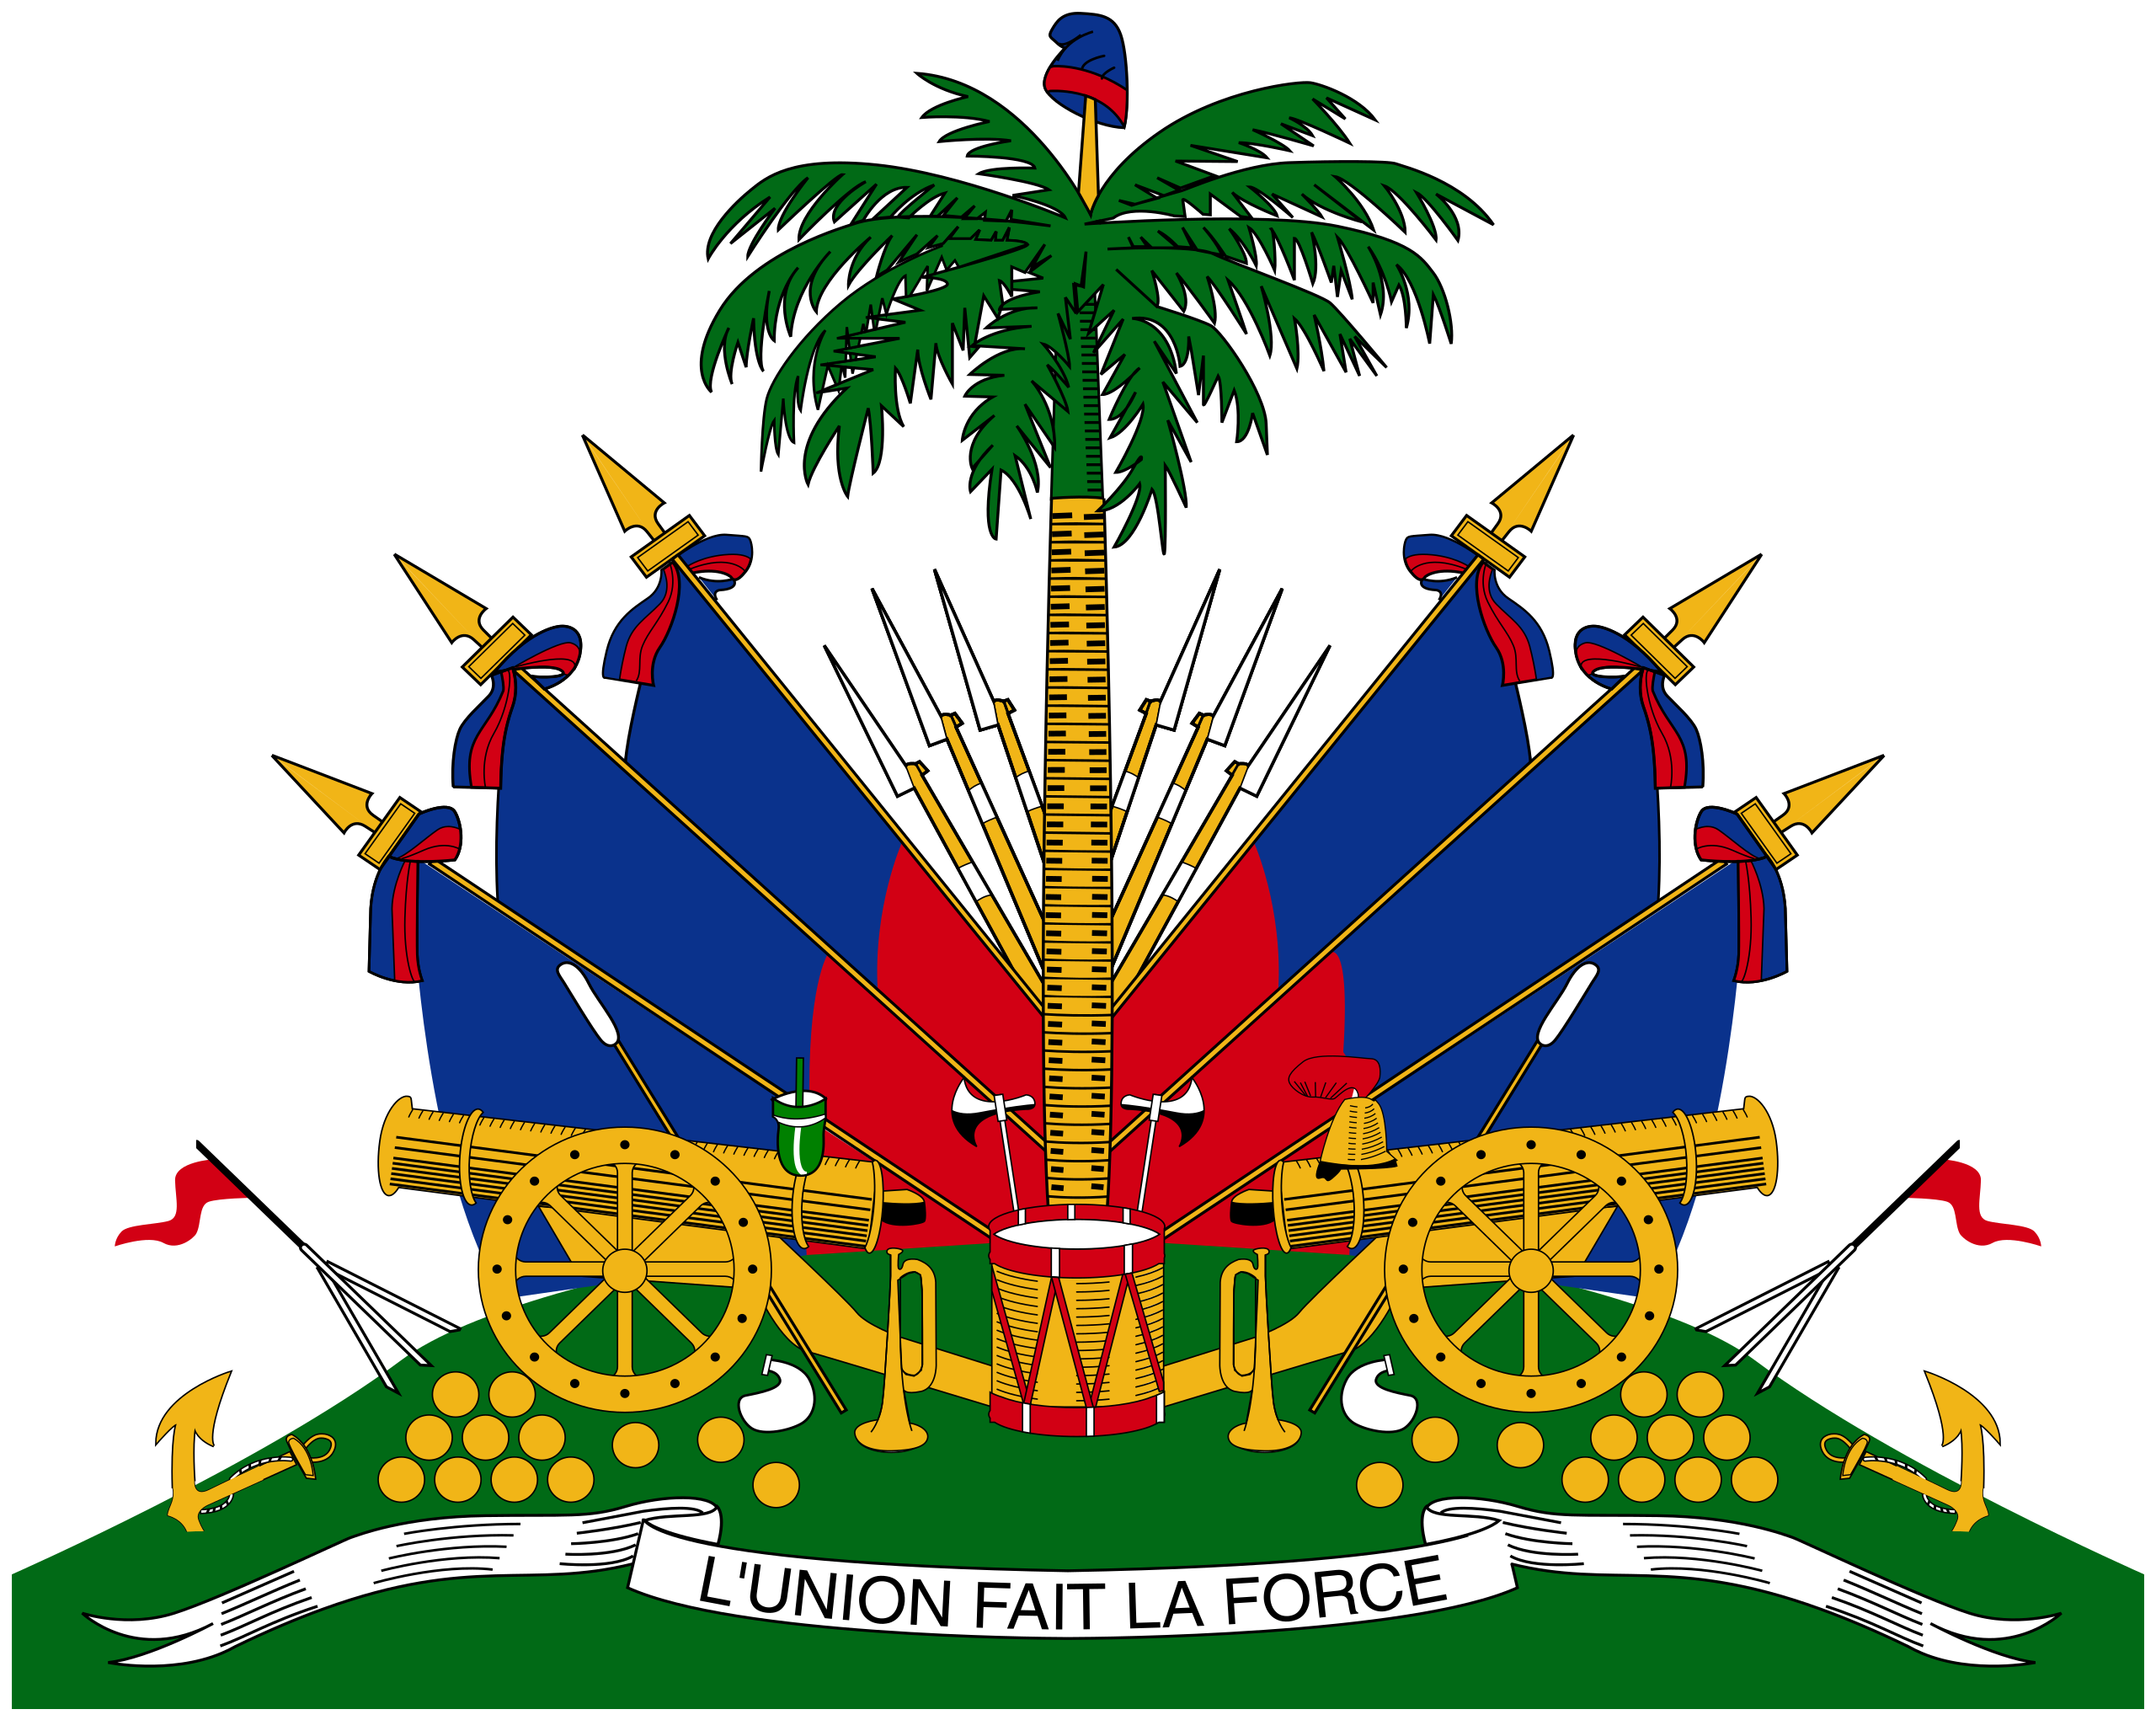 Le Drapeau Haitien!!!!!  Haitian independence day, Haitian flag,  Independence day